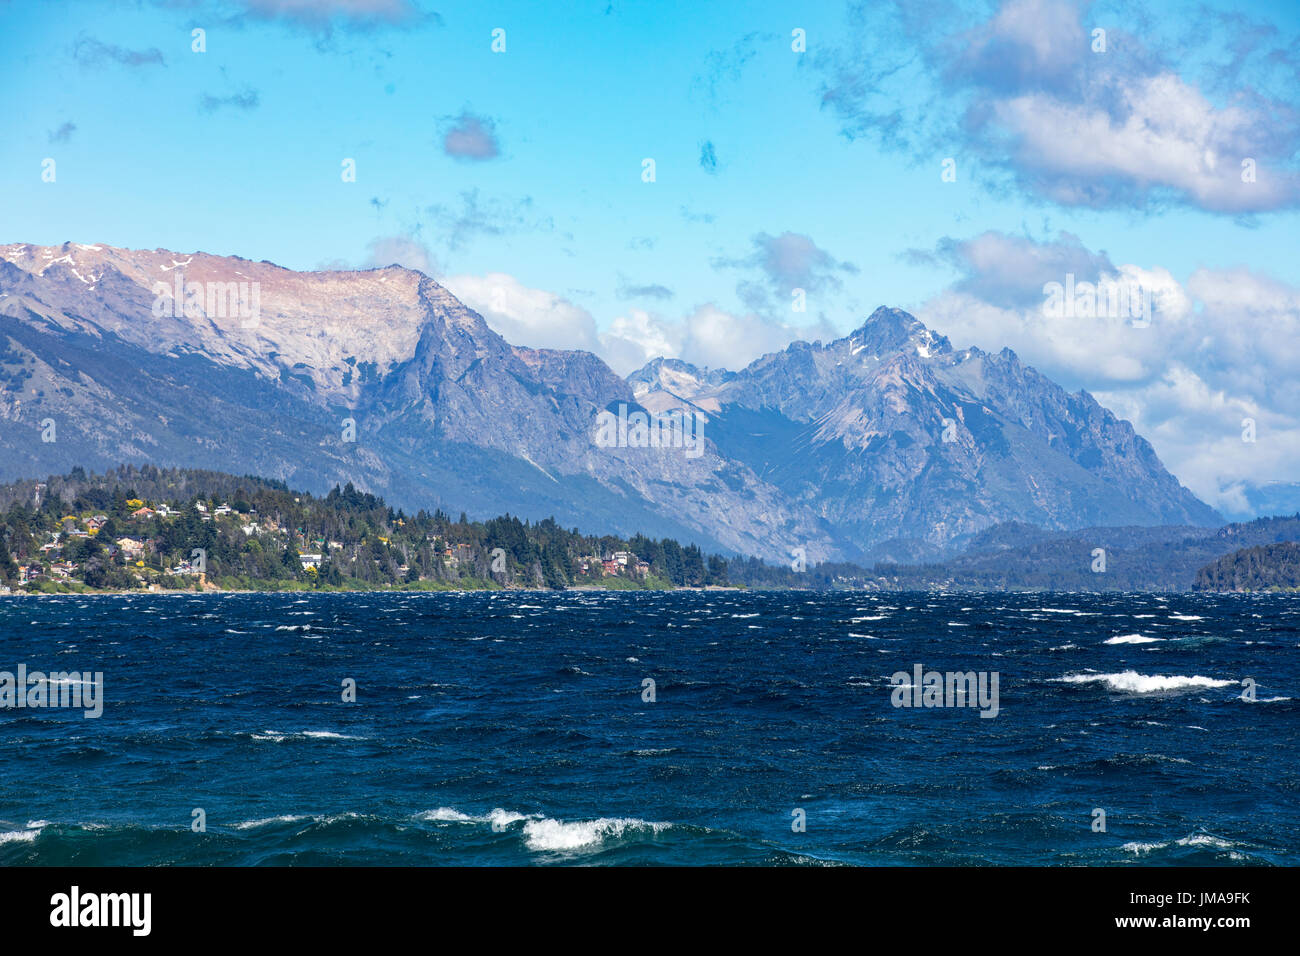 The Nahuel Huapi lake with the mountains in background. Bariloche, Argentina. Stock Photo